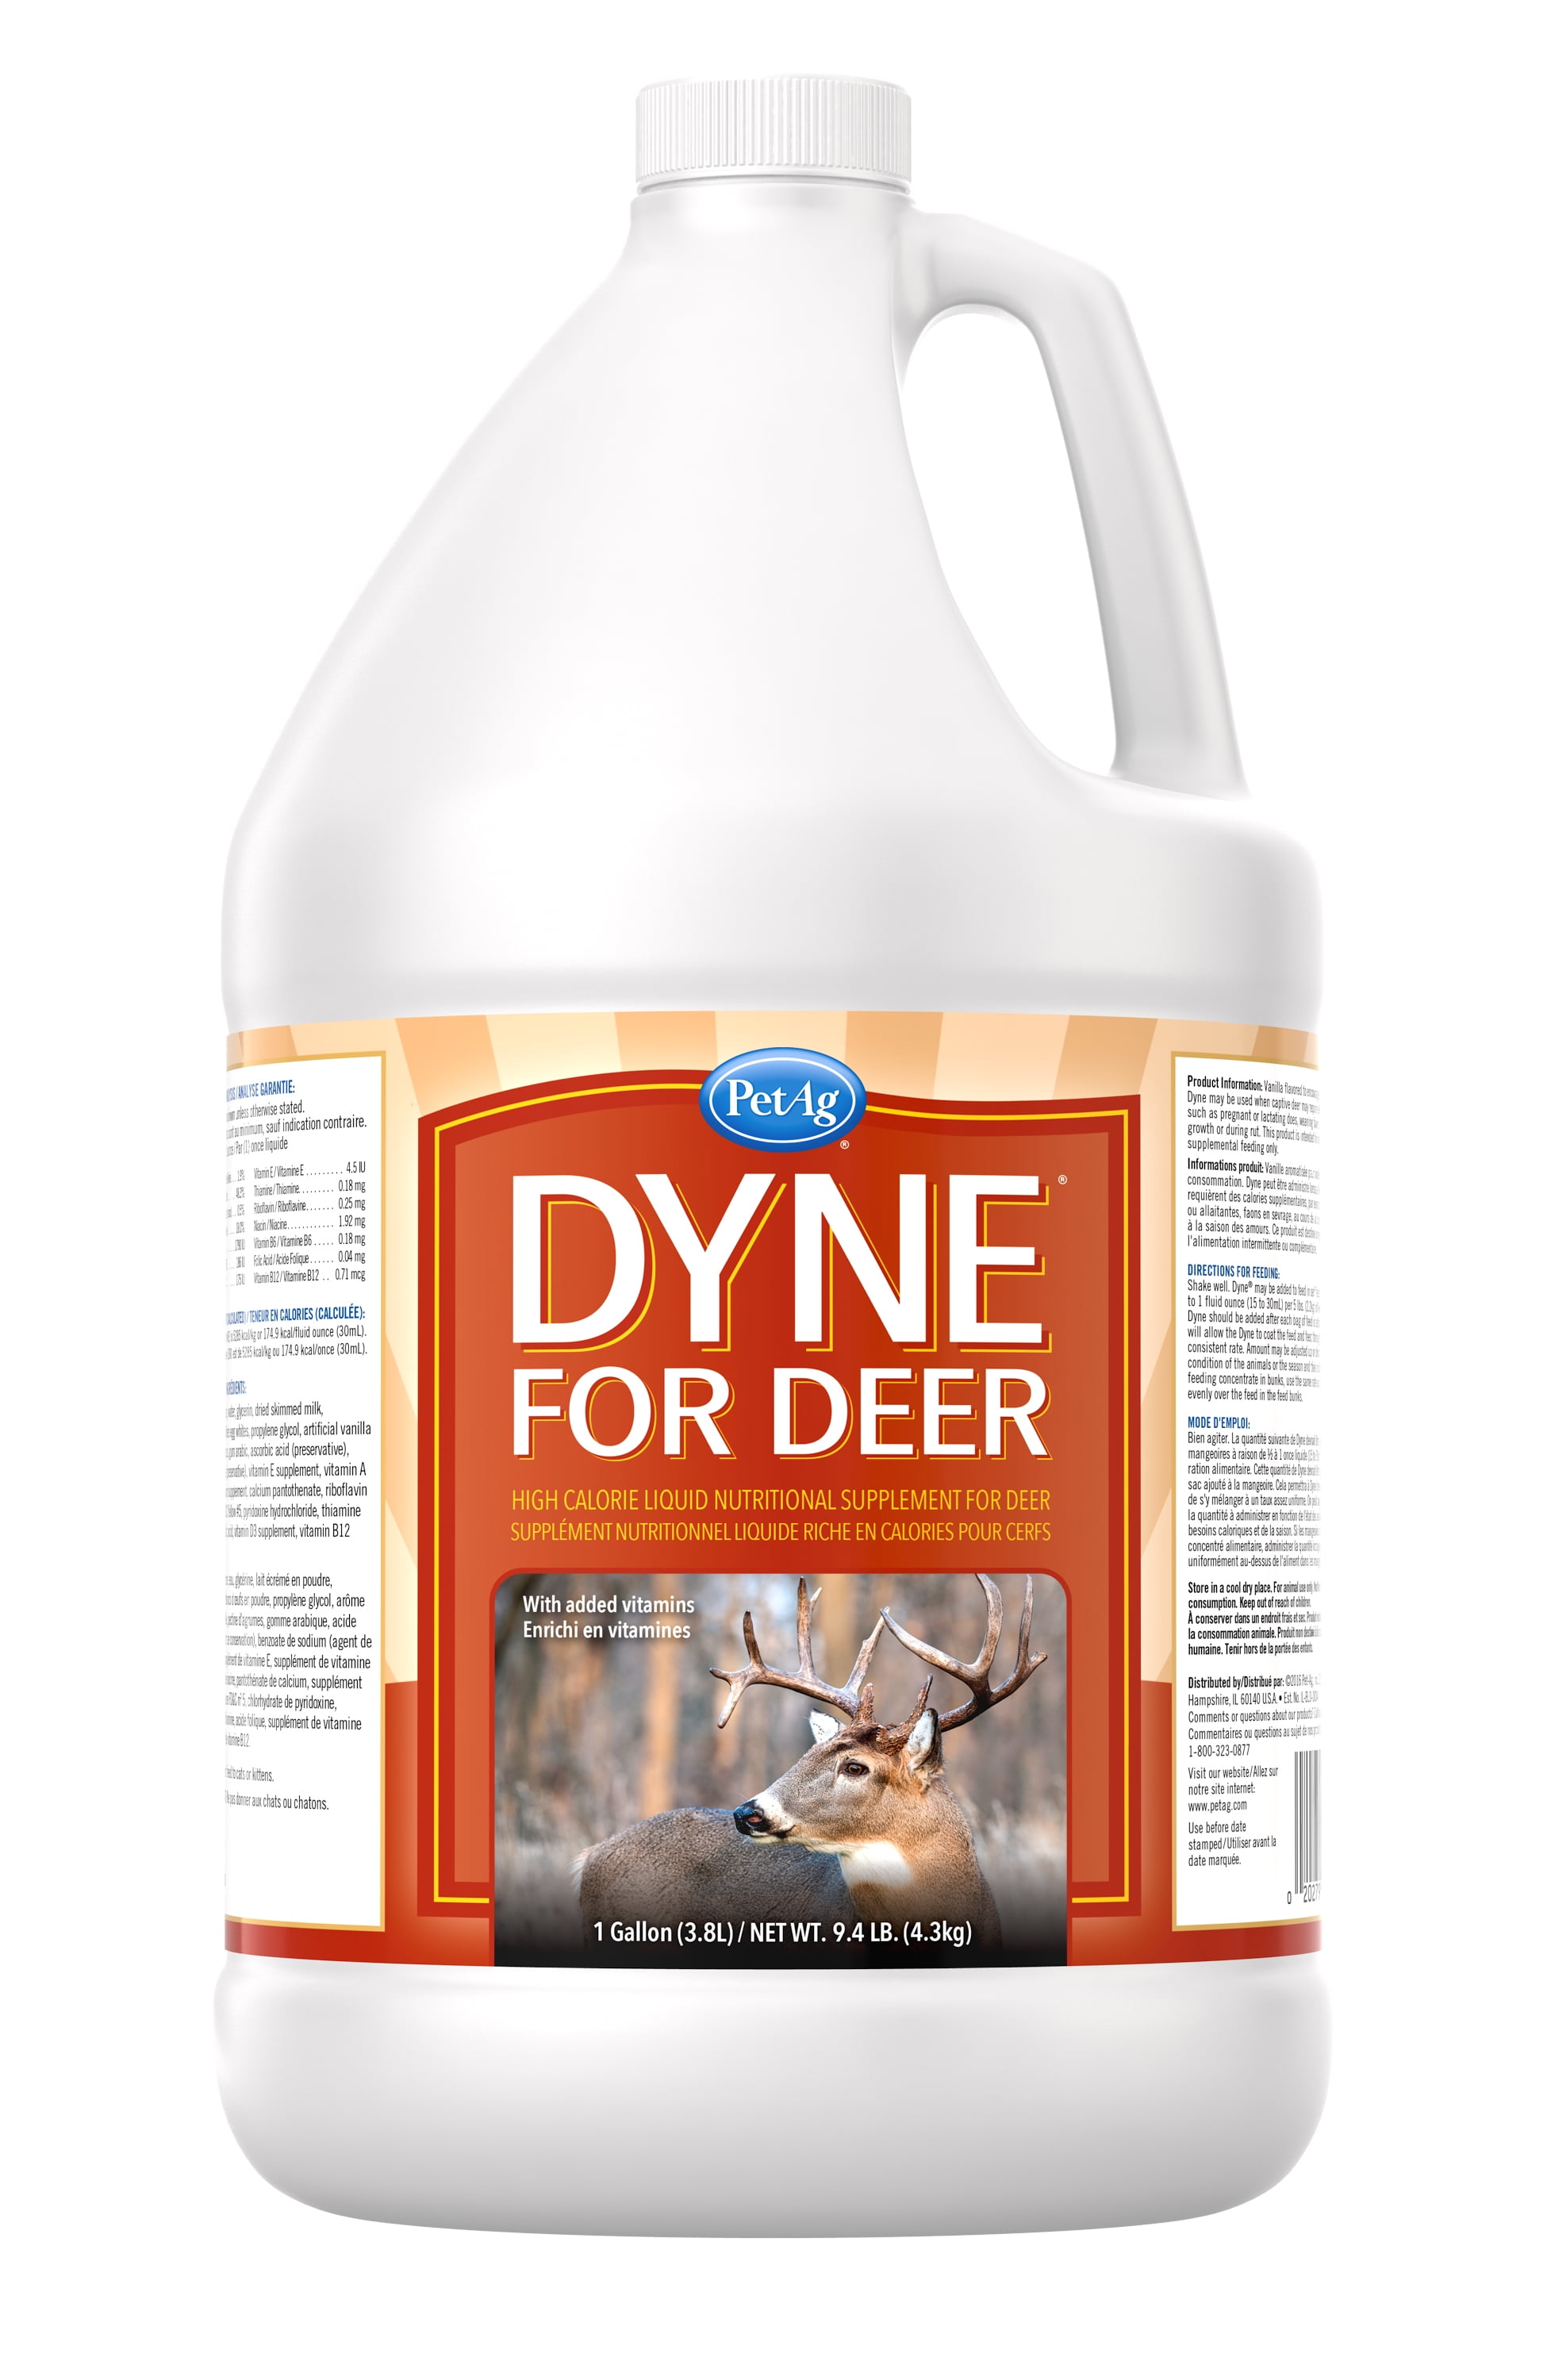 dyne nutritional supplement